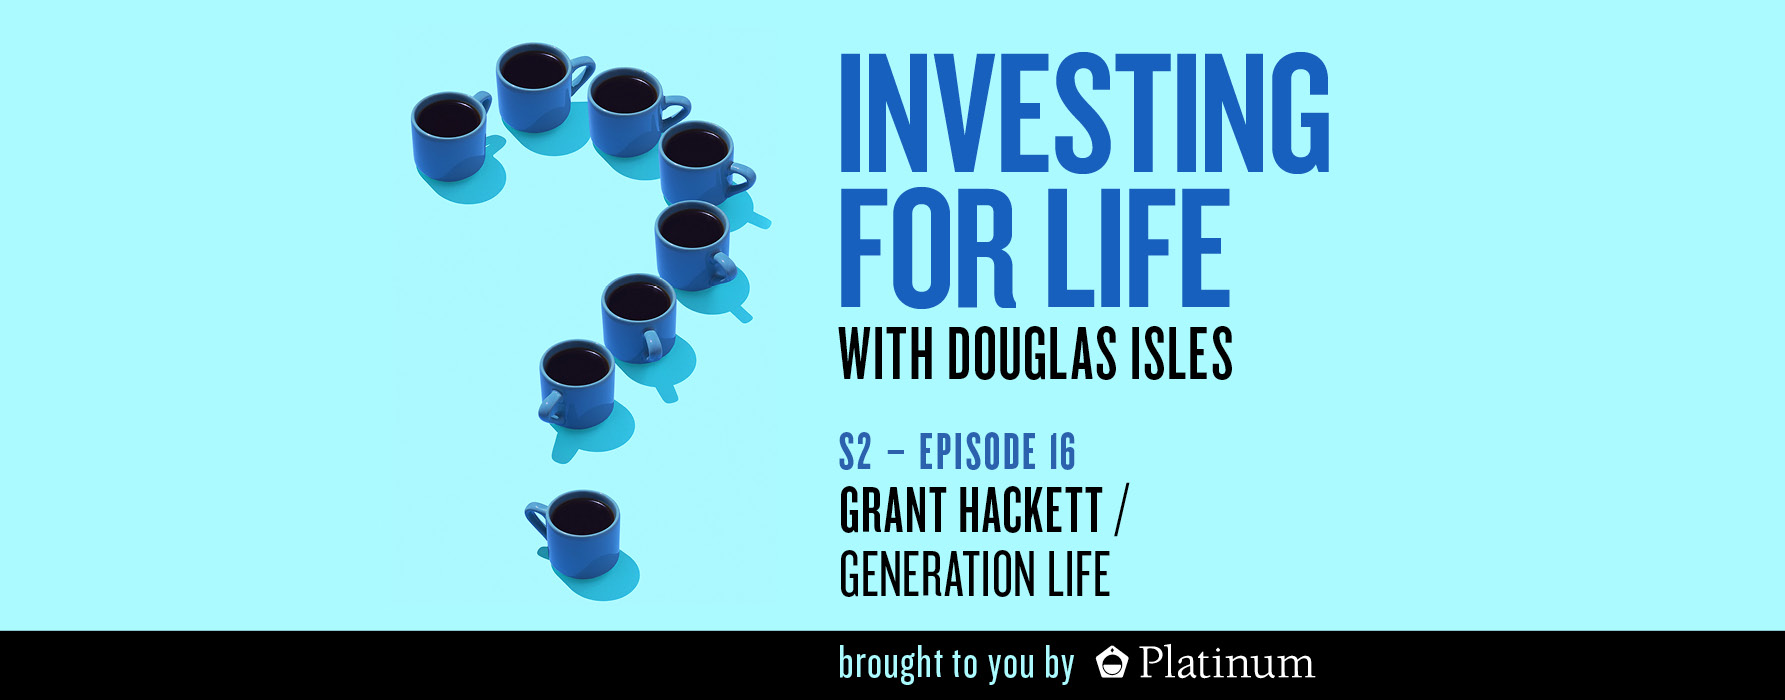 Investing for Life Podcast - Grant Hackett OAM, CEO, Generation Life